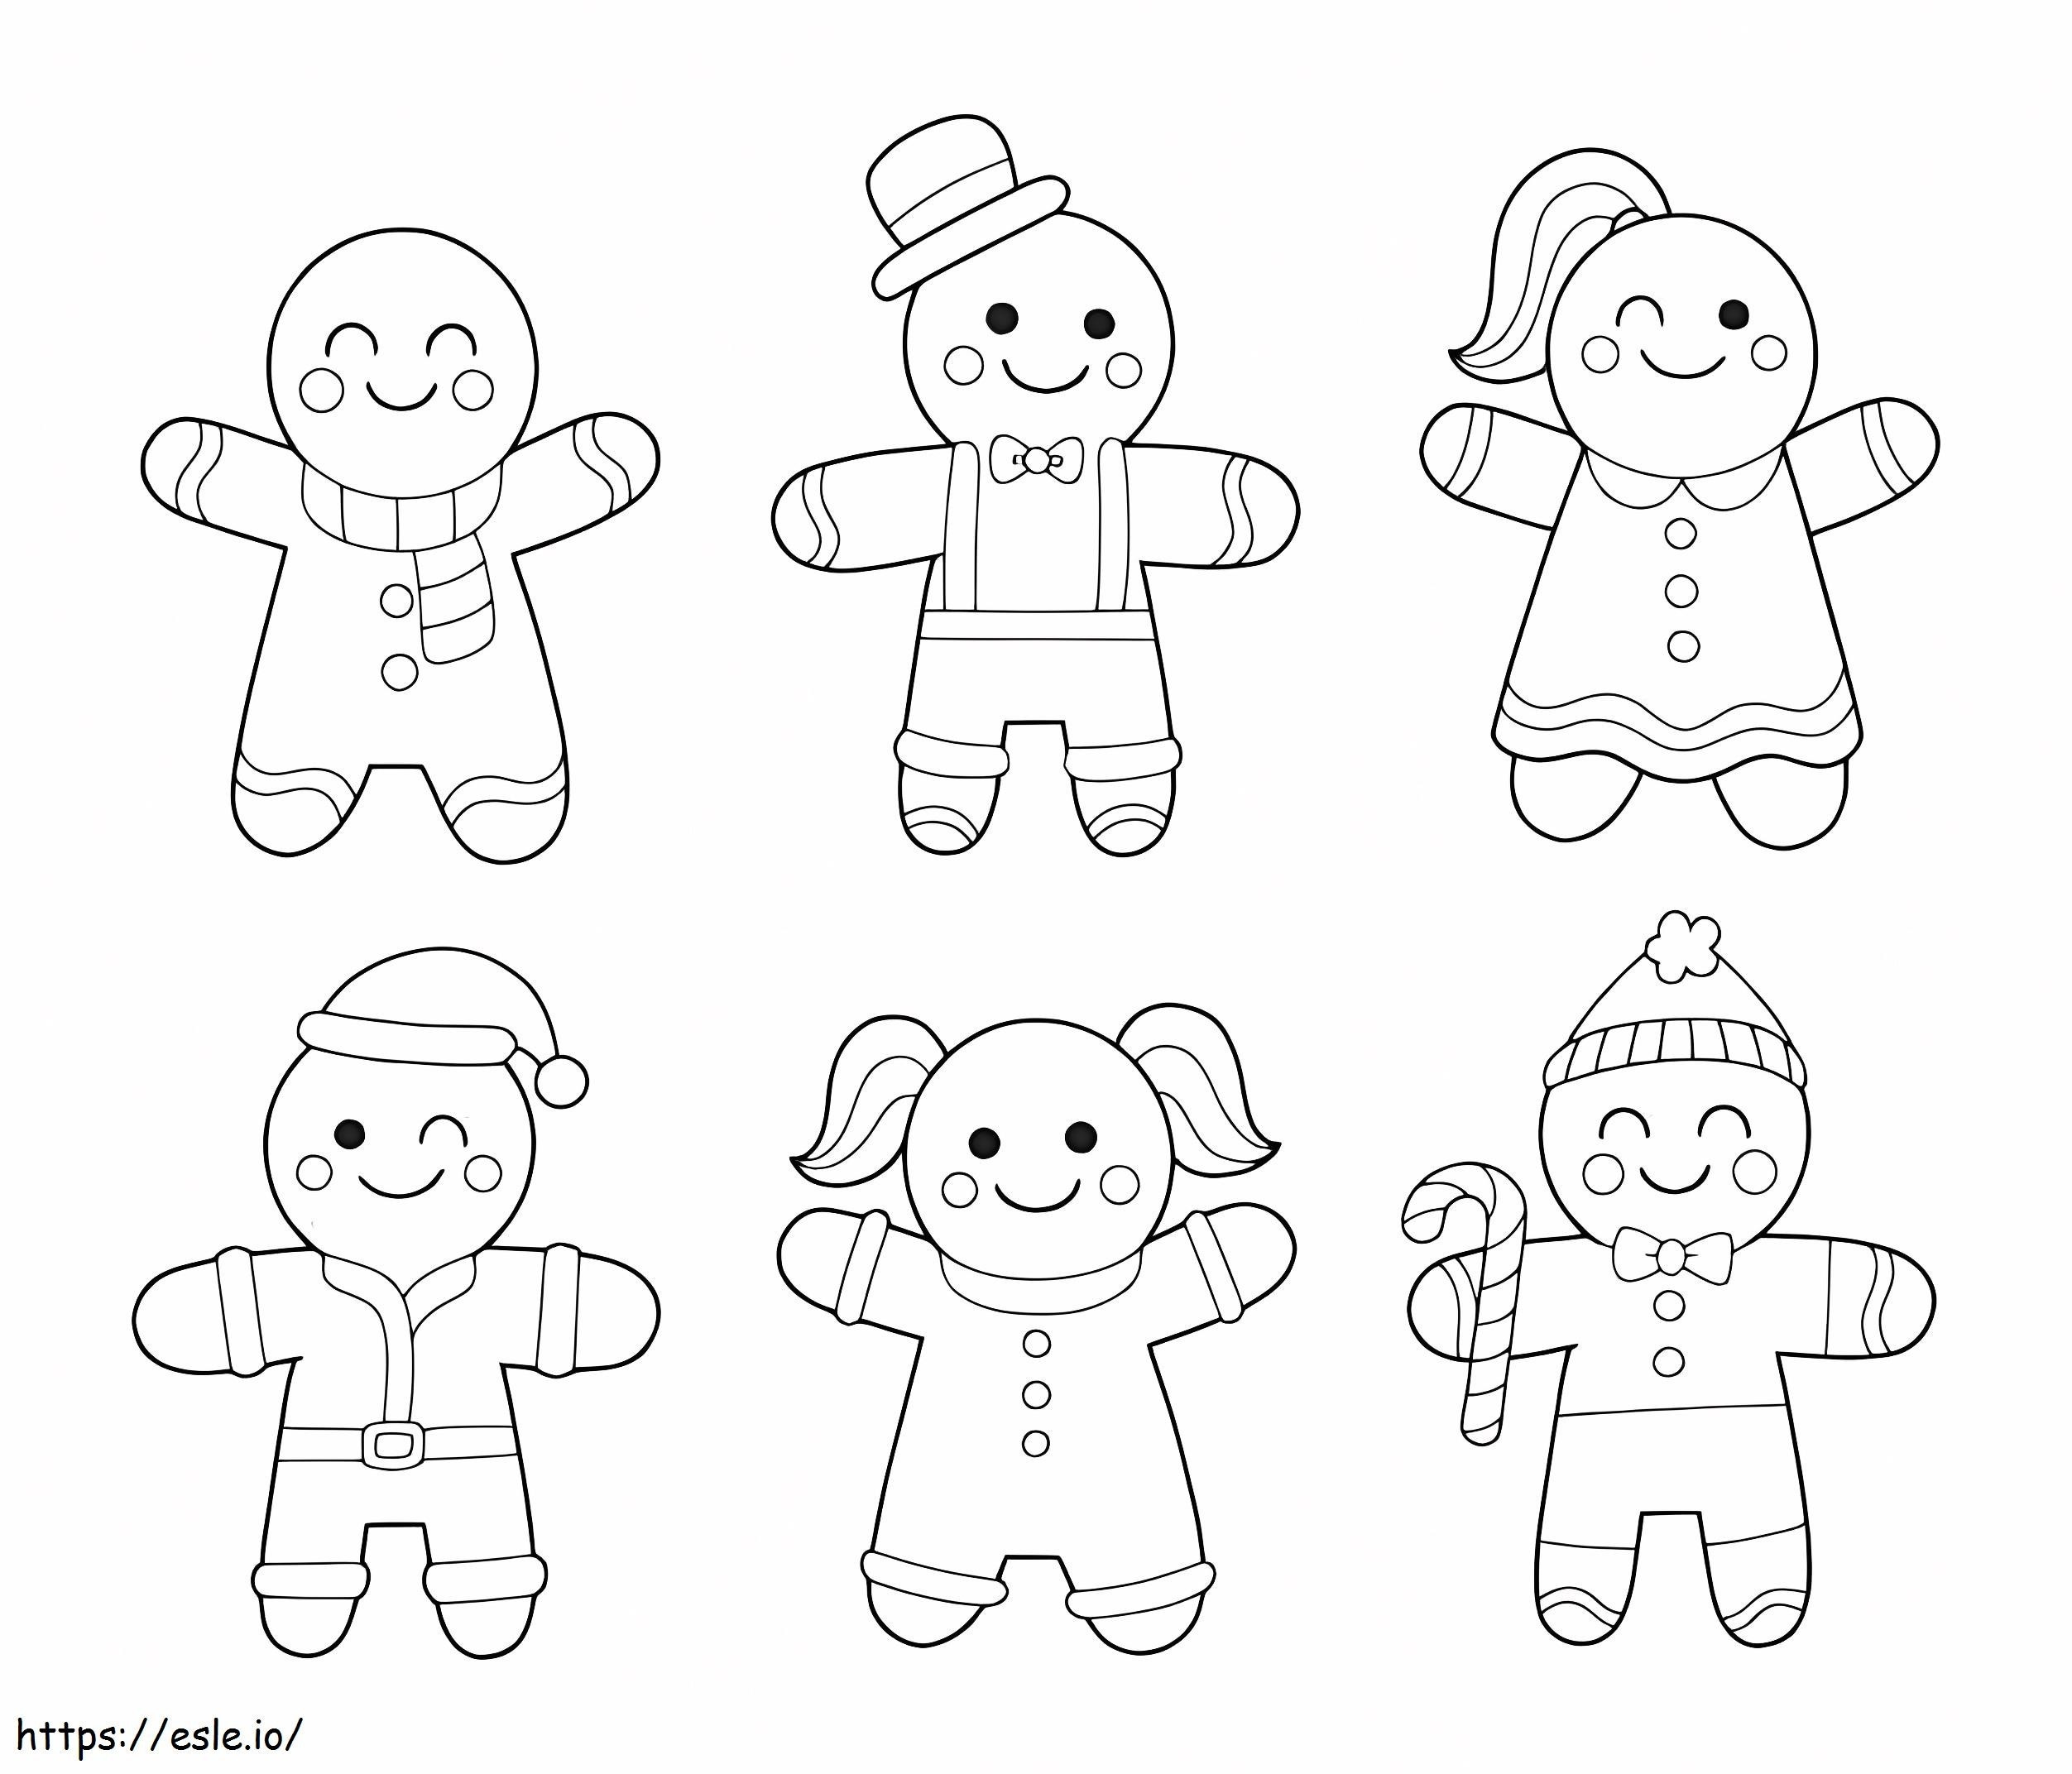 Six Gingerbread Men coloring page